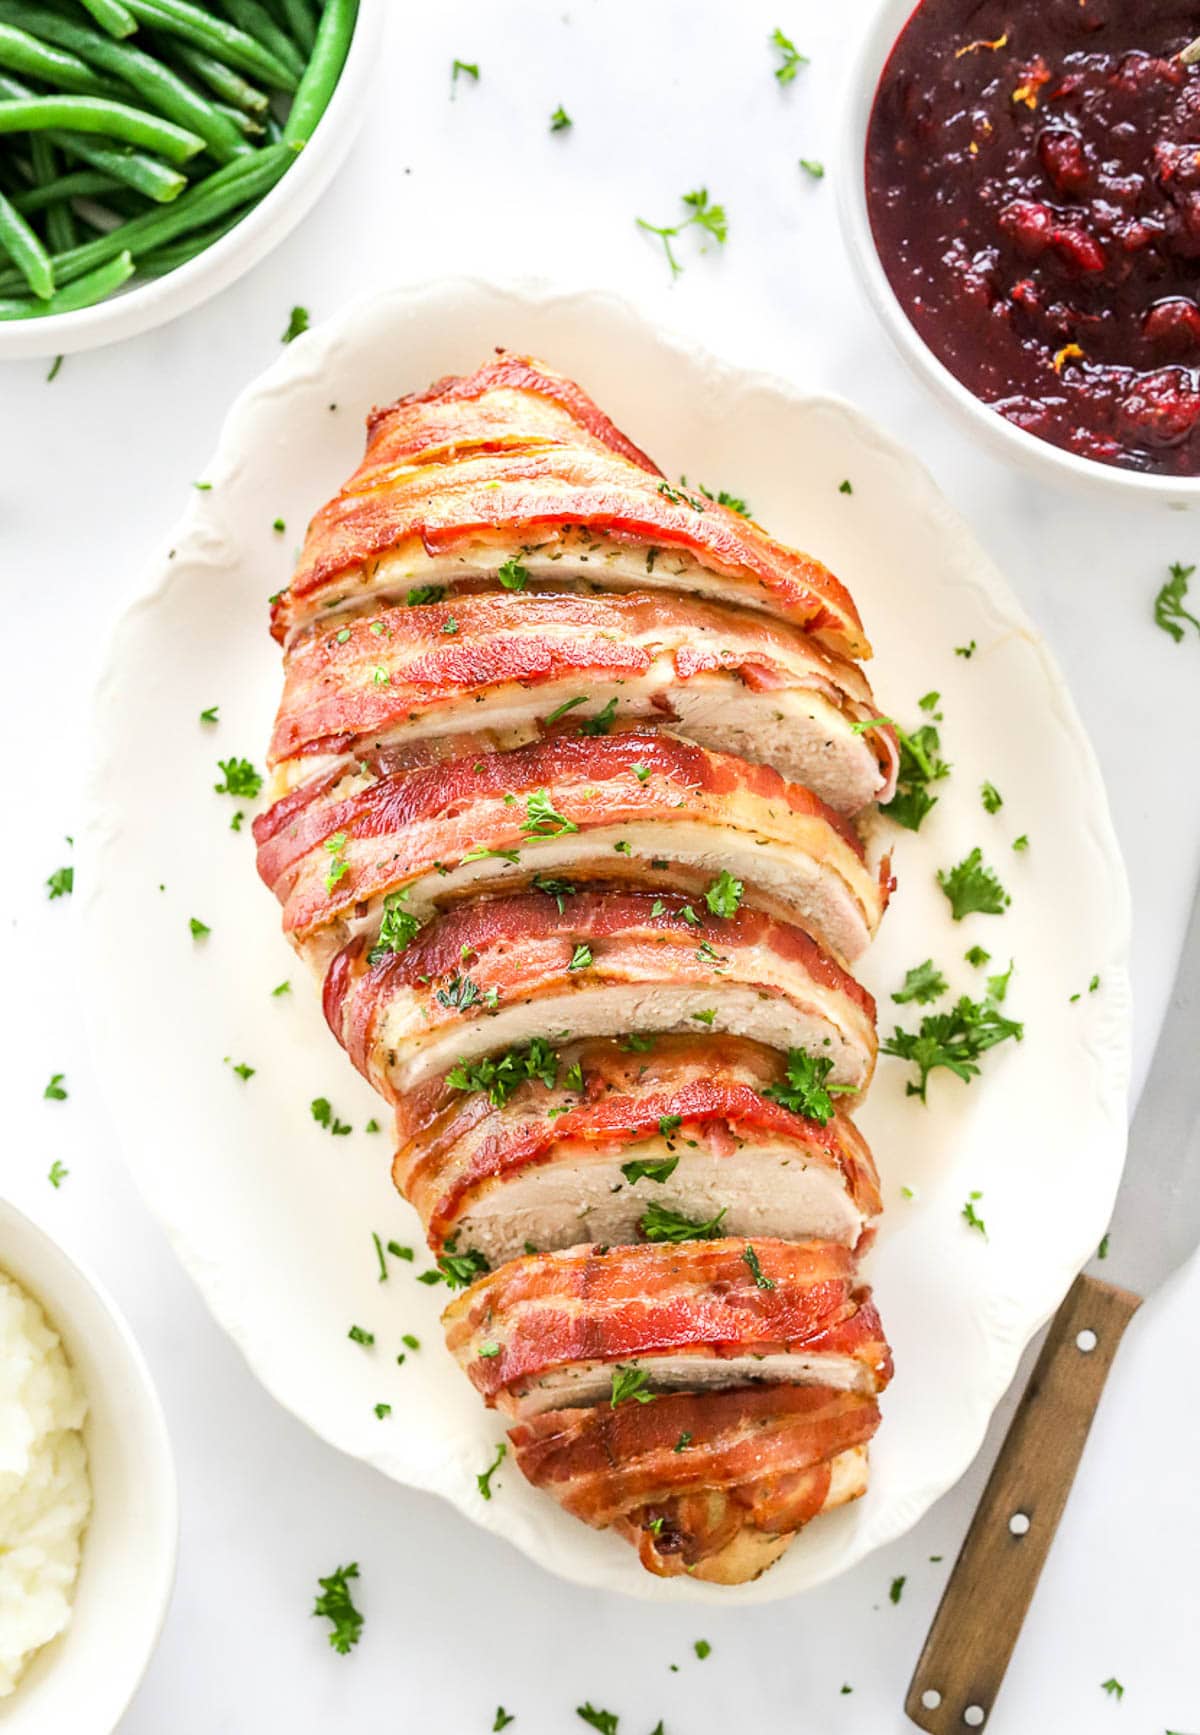 Turkey breast wrapped in bacon sliced and served on a platter with parsley garnish.